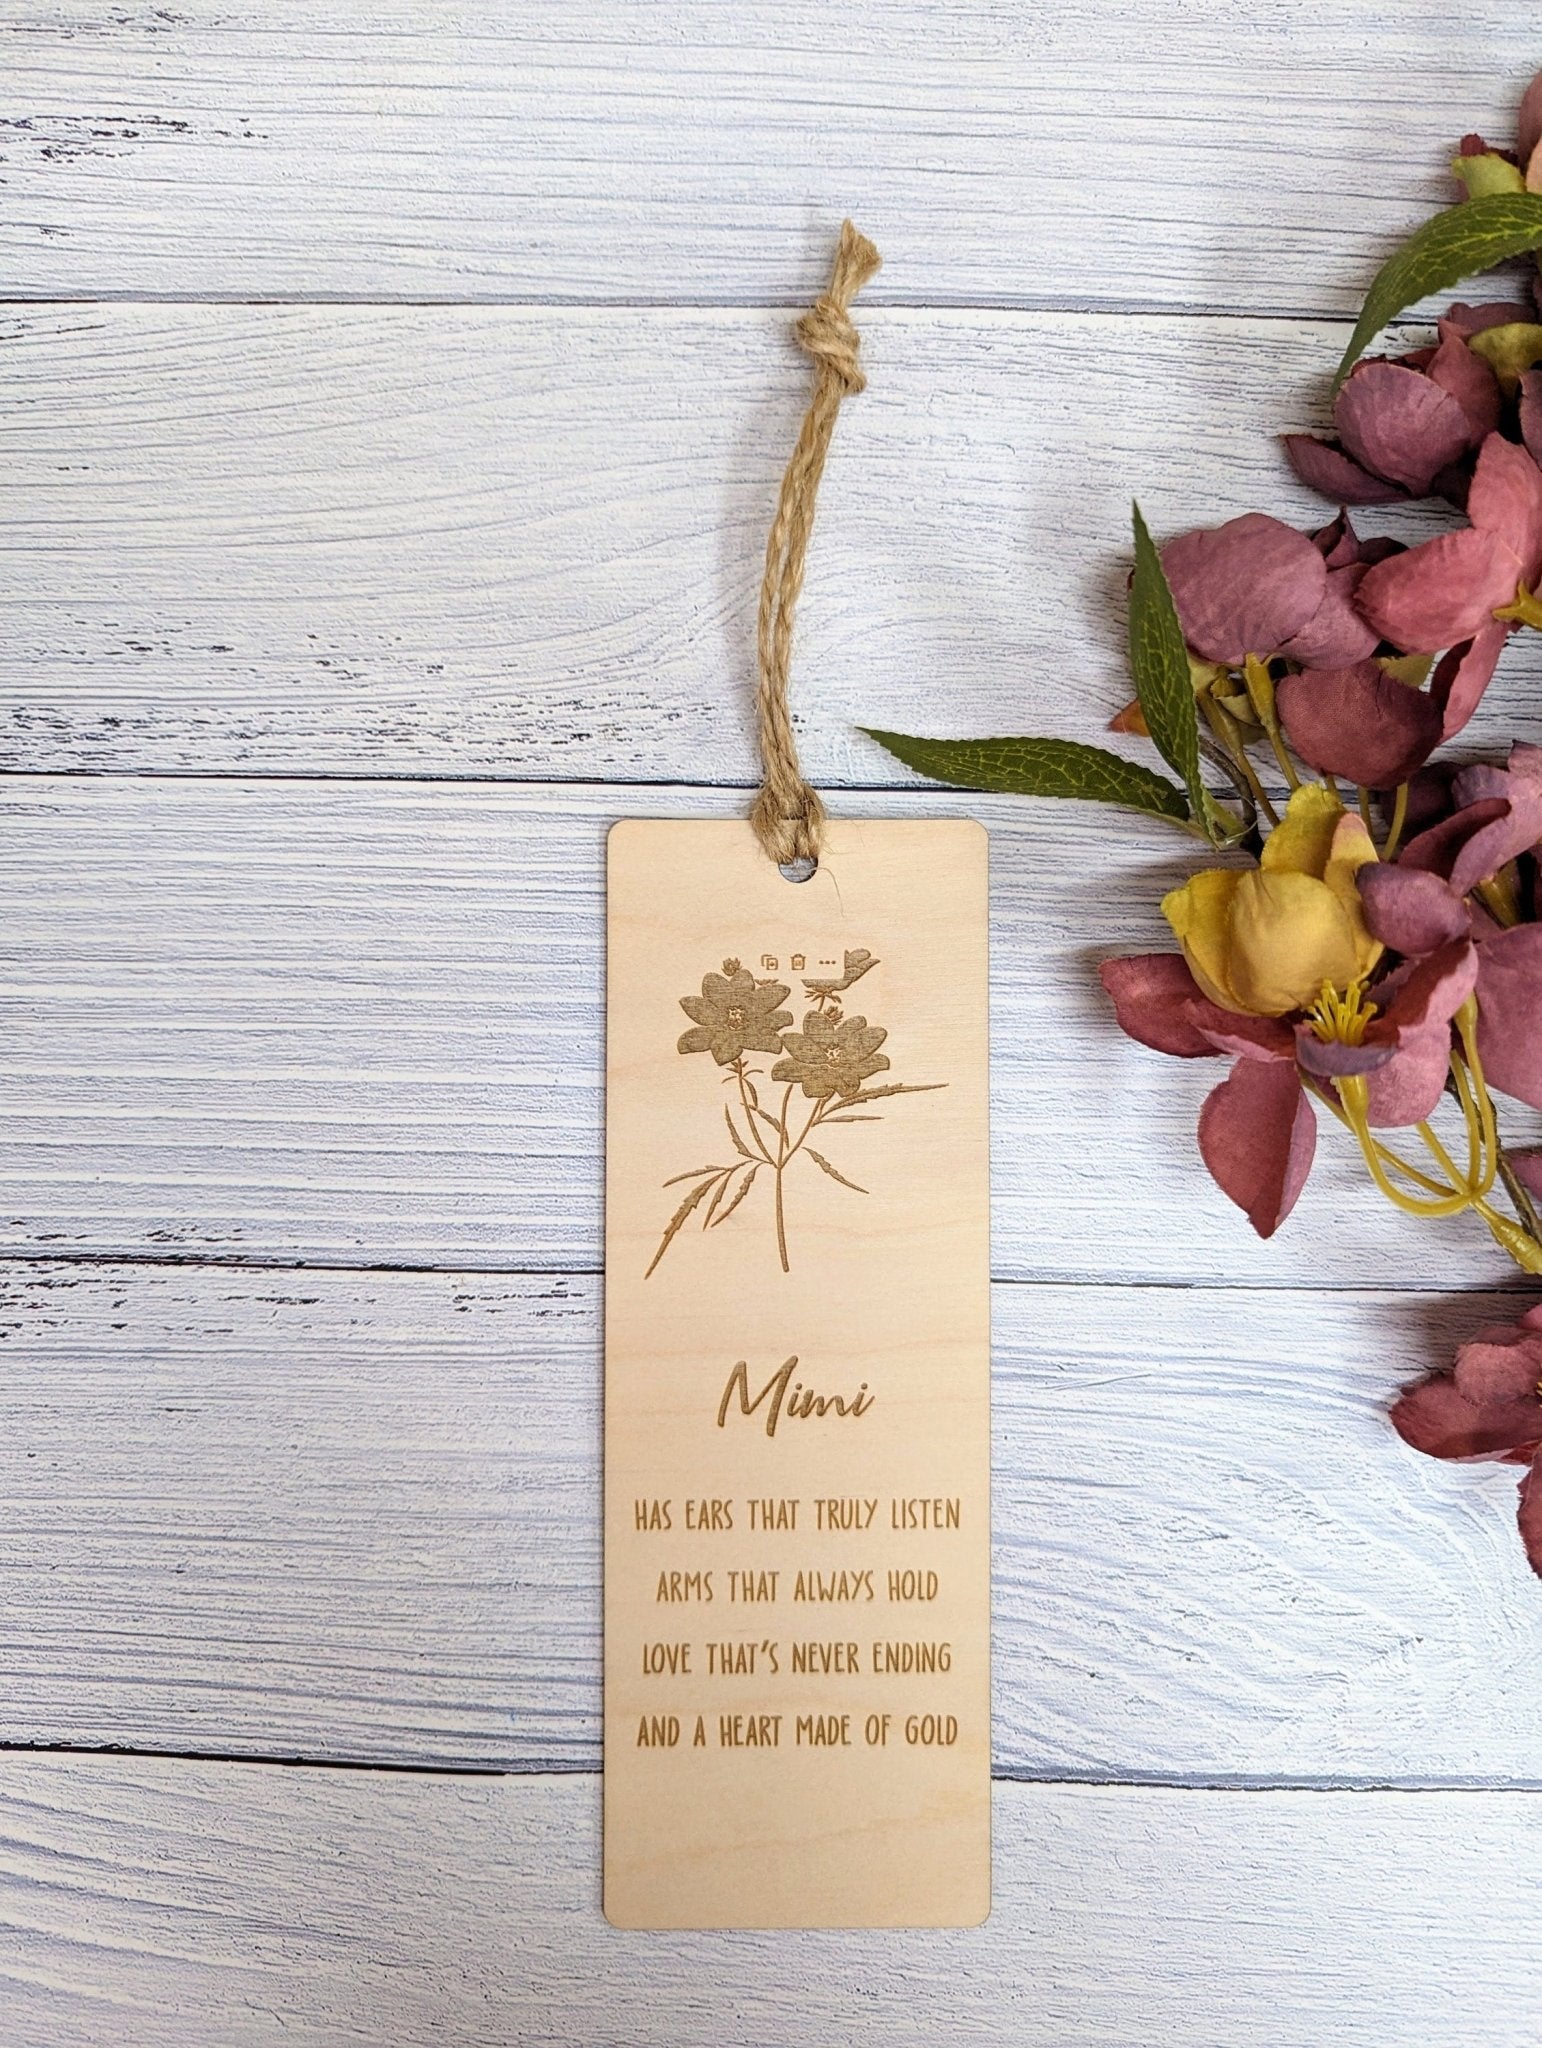 Personalised Wooden Bookmark for Grandparents with Poem - Unique Gift for Gran, Grandad, Nana, Mimi and More - CherryGroveCraft